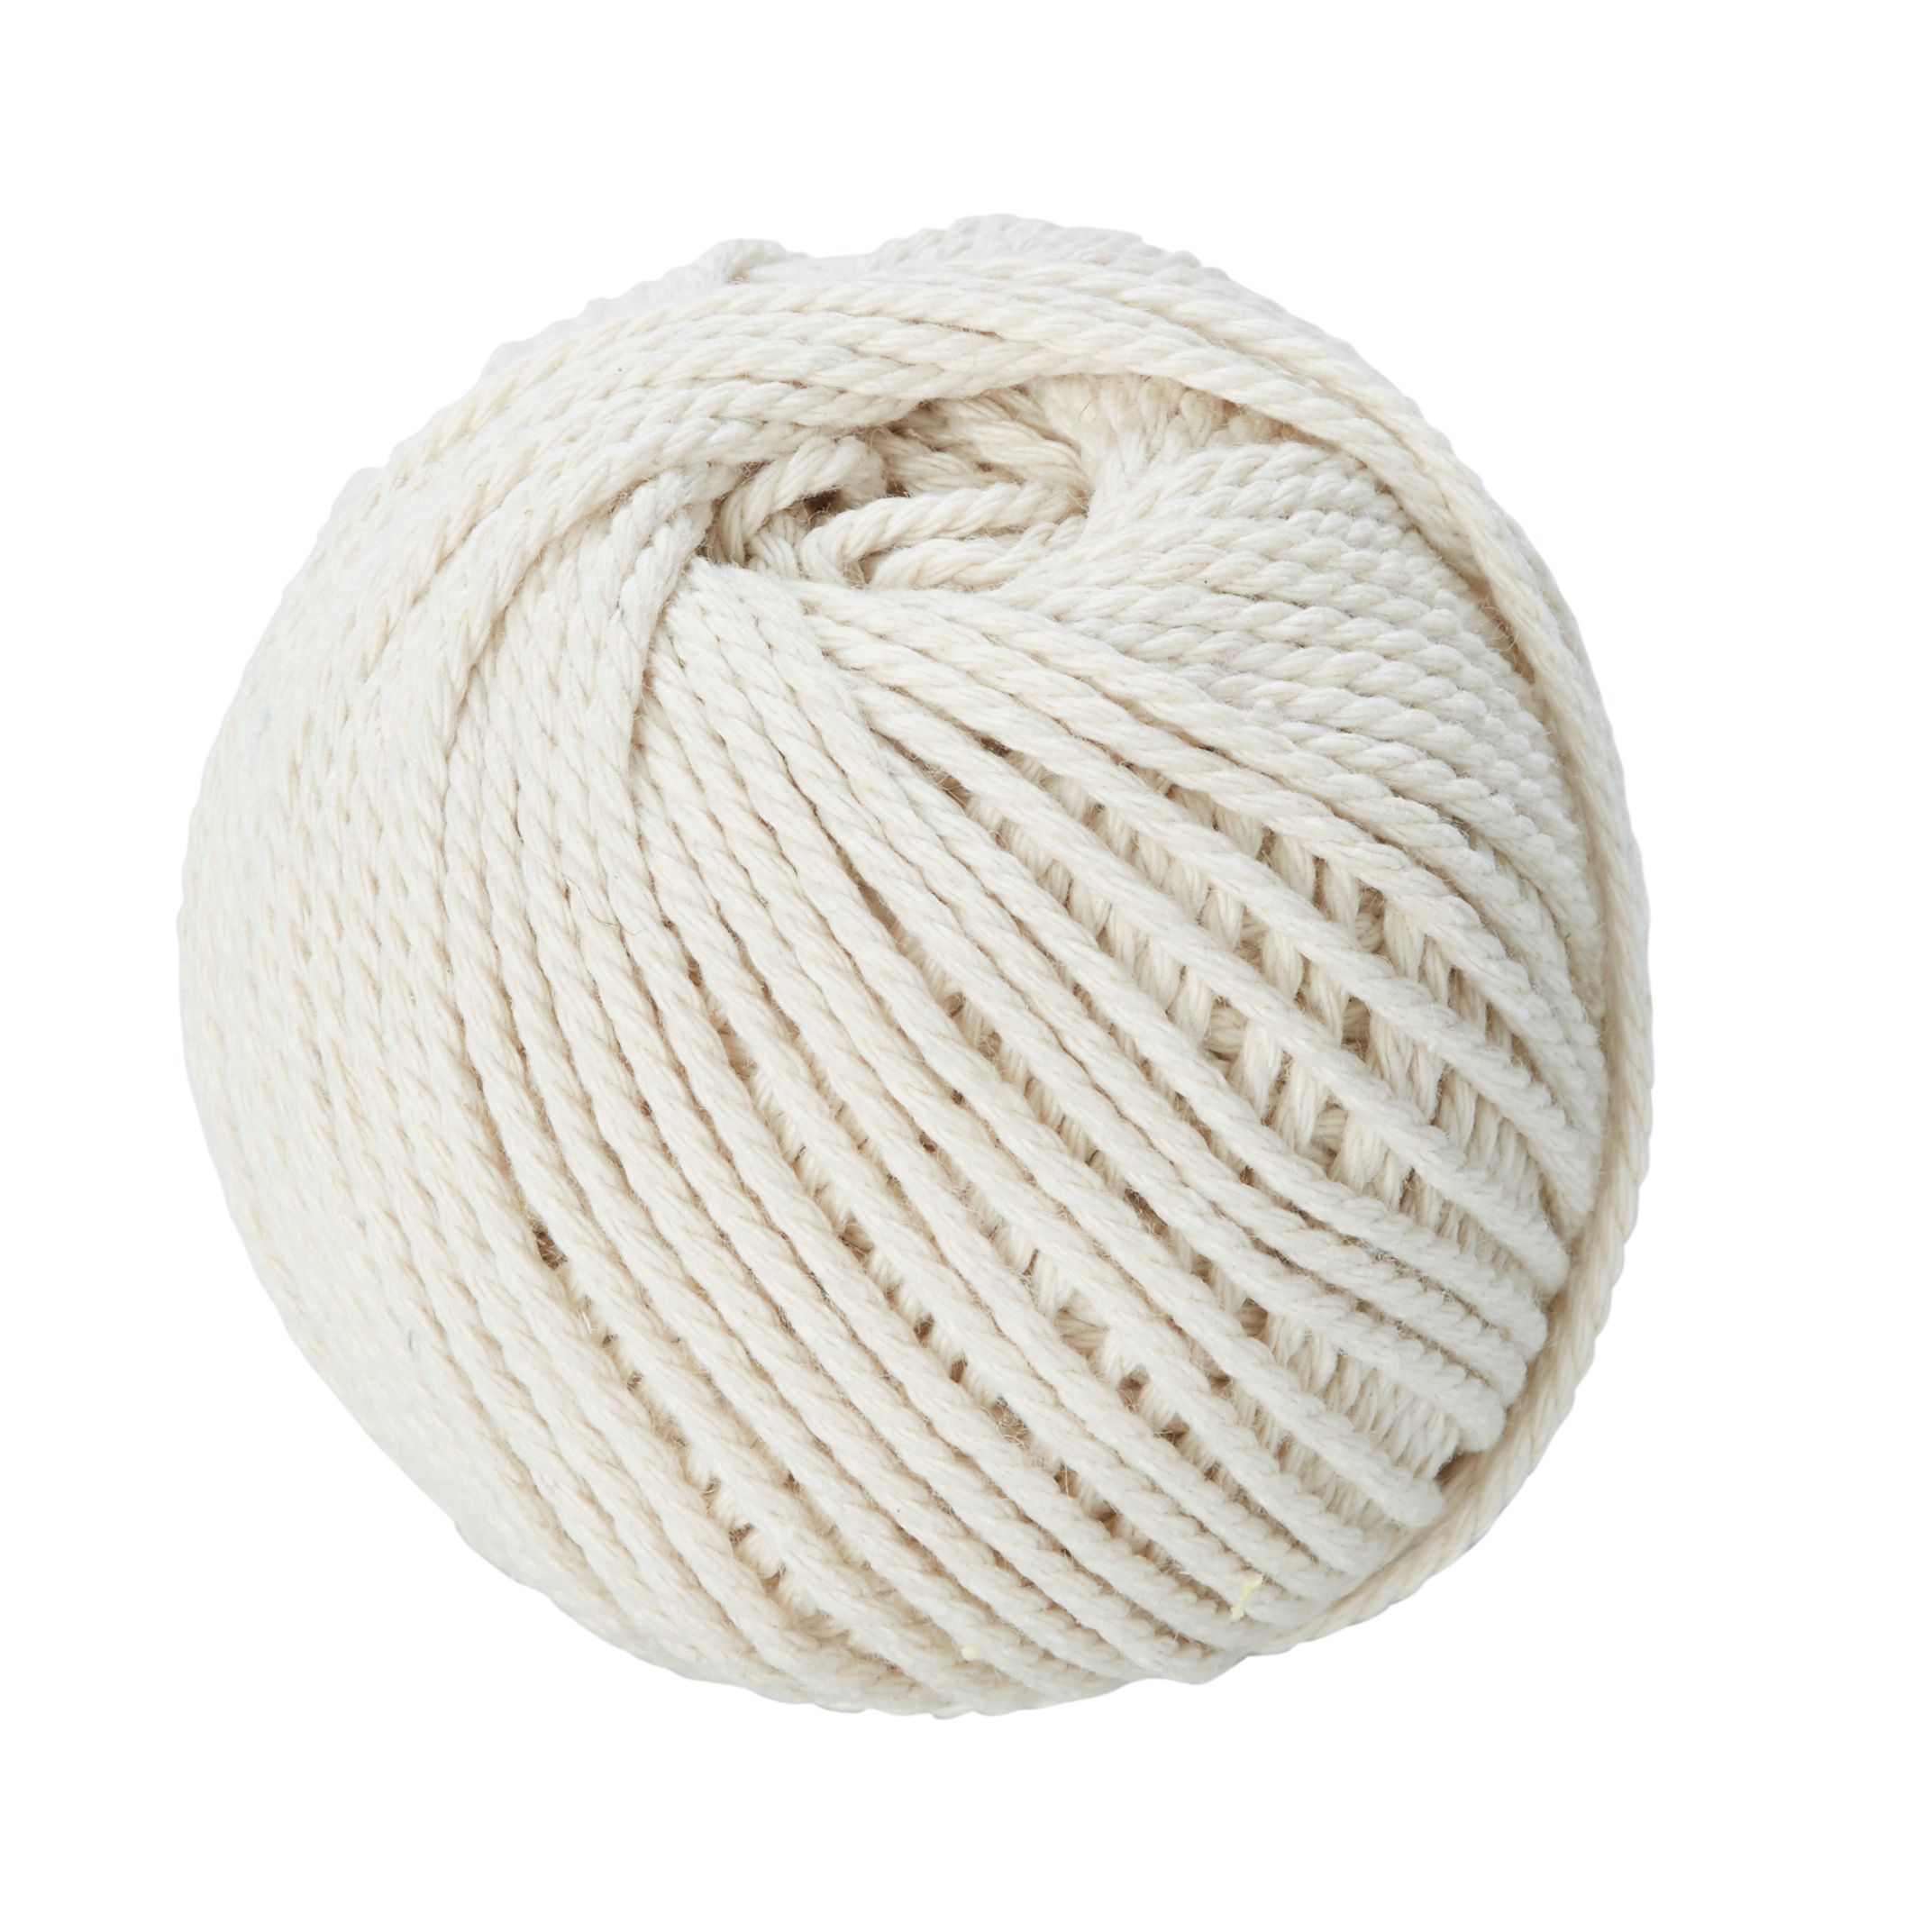 Diall Cotton Cotton twine 1.5mm x 60m | Departments | DIY at B&Q